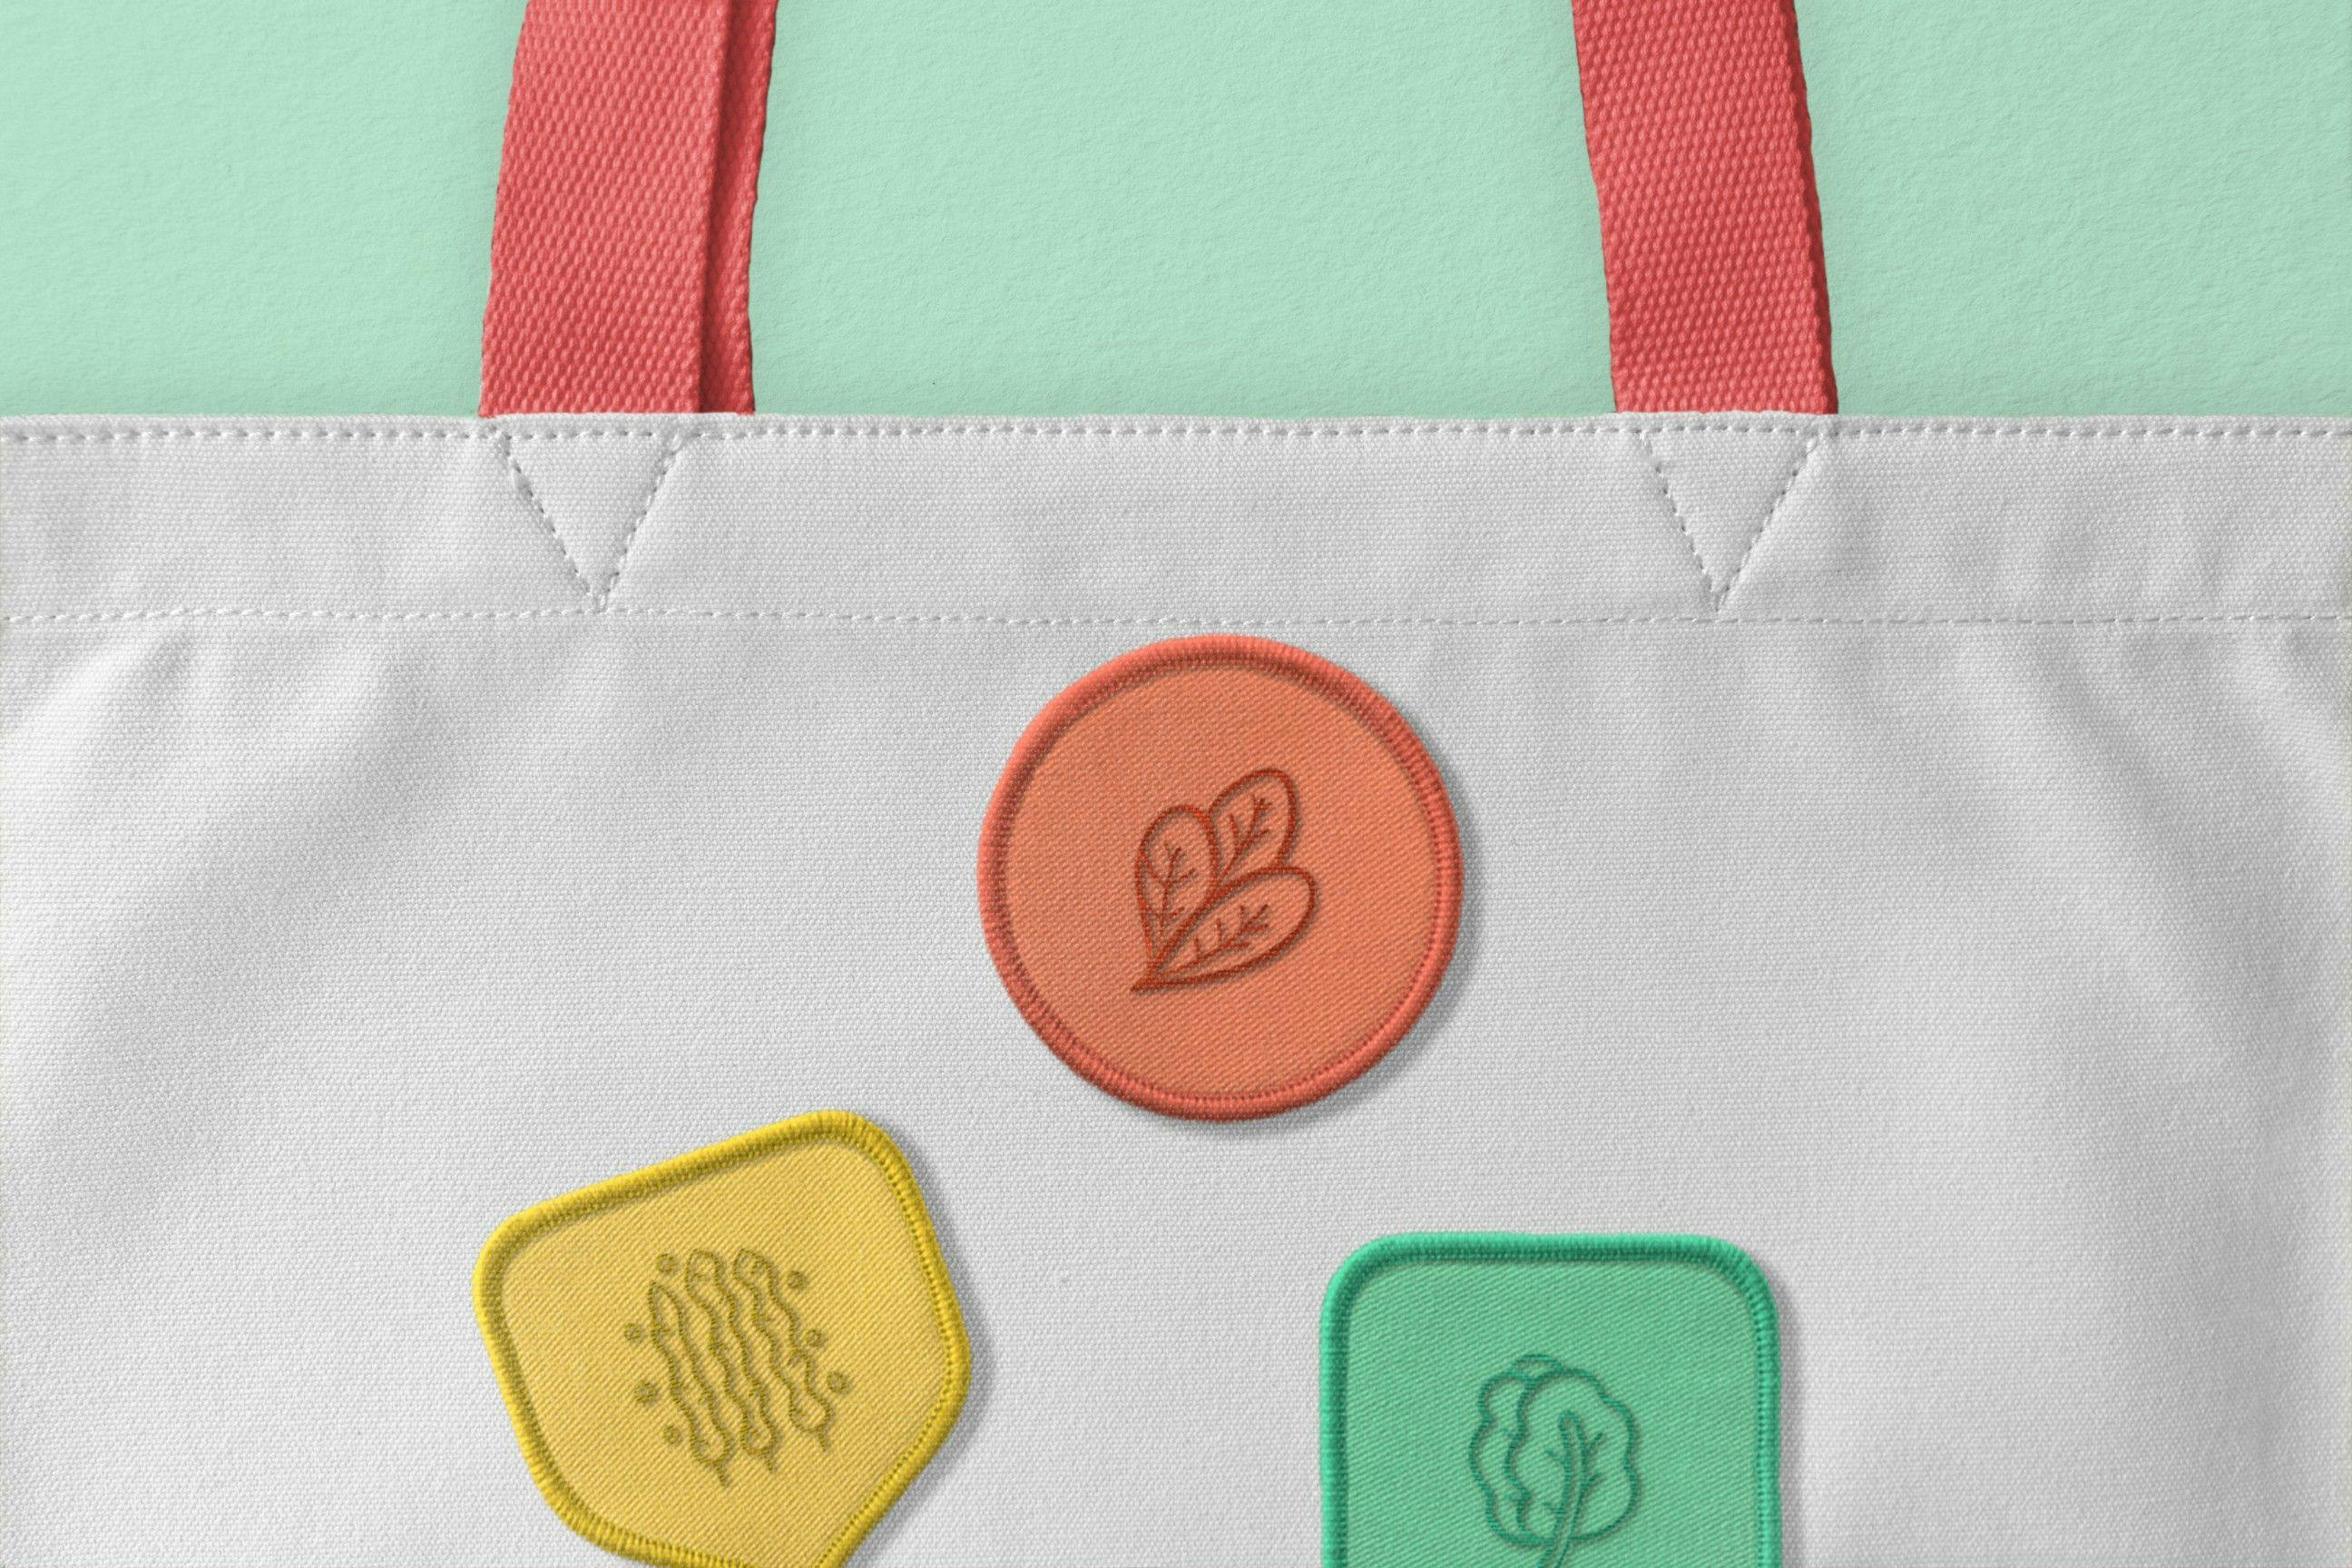 Kafka's Organic's shopping bag decorated with badges